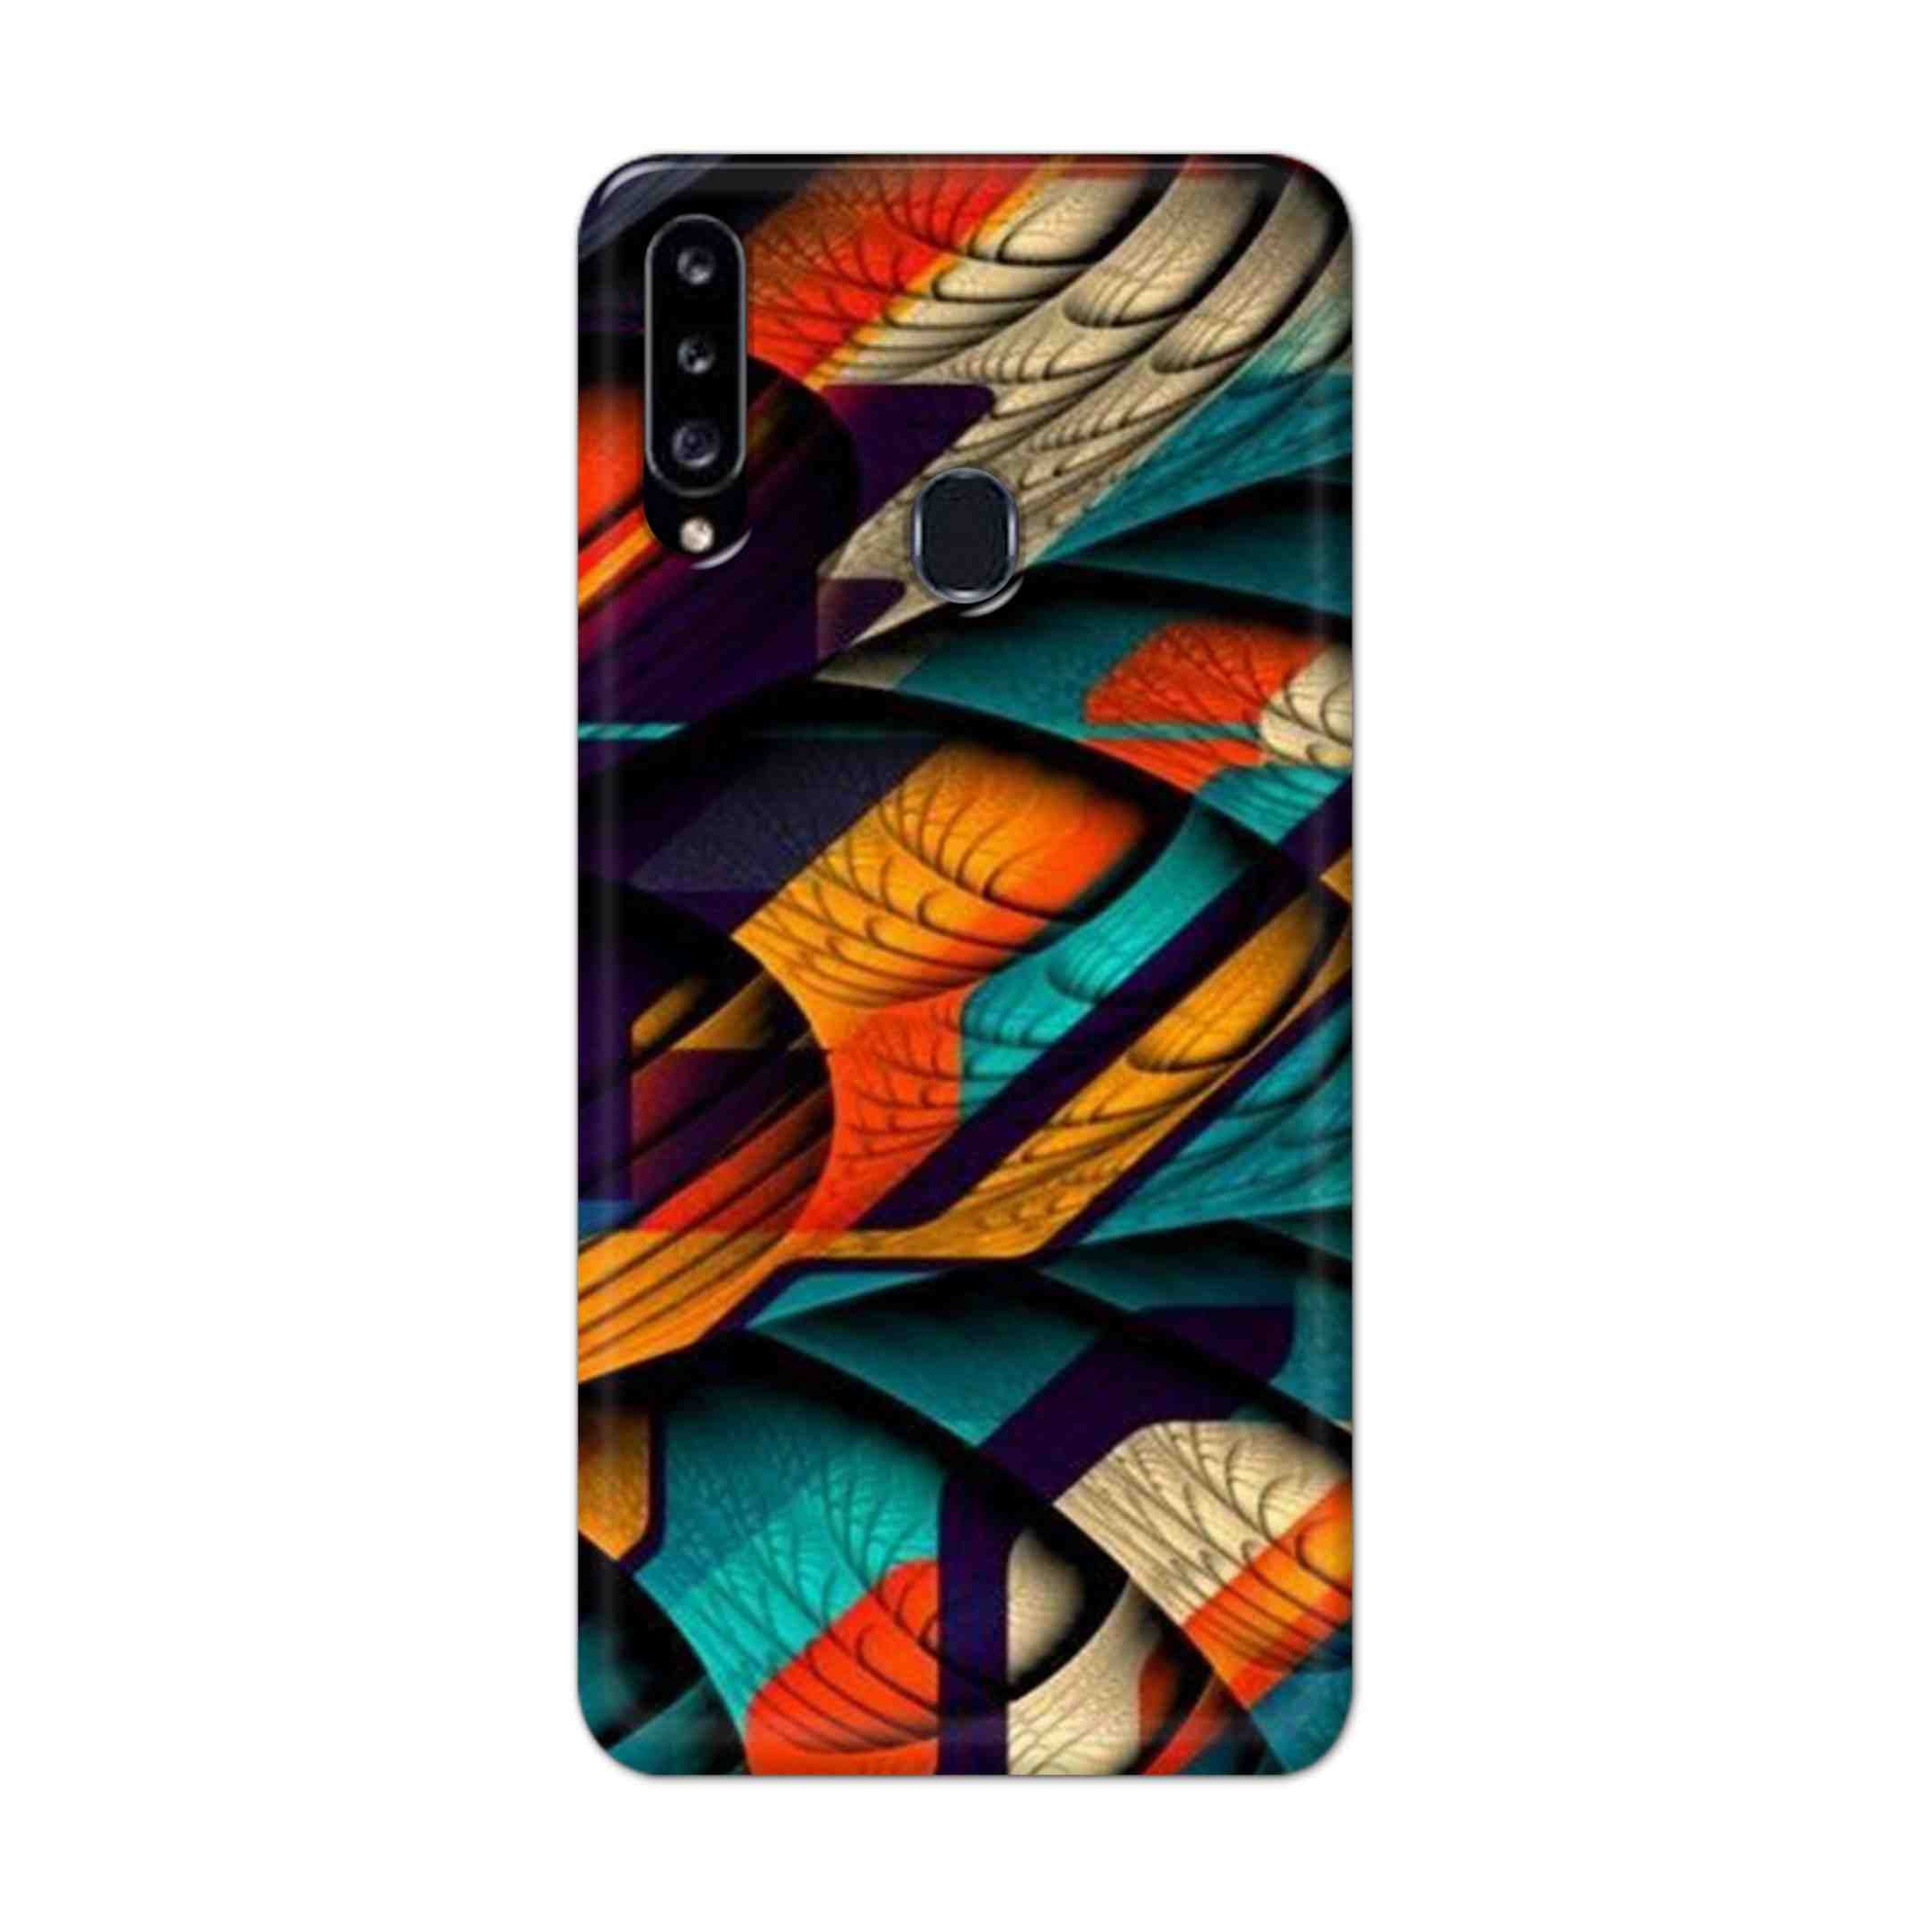 Buy Colour Abstract Hard Back Mobile Phone Case Cover For Samsung Galaxy A21 Online